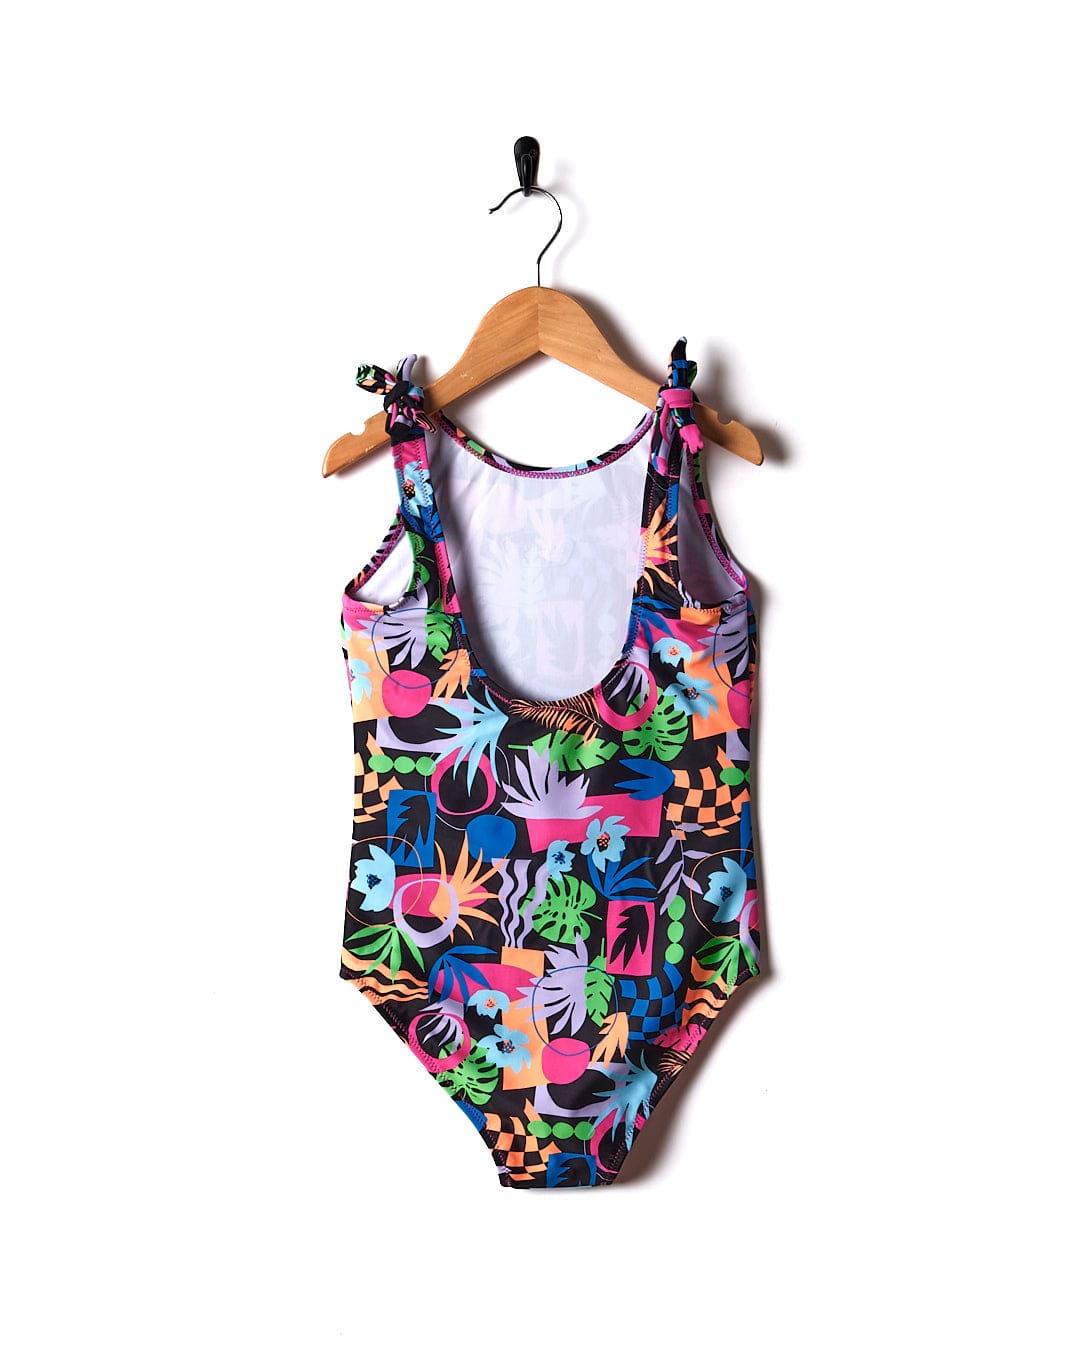 A colorful Sunny Zephyr one piece swimsuit hanging on a wooden hanger.